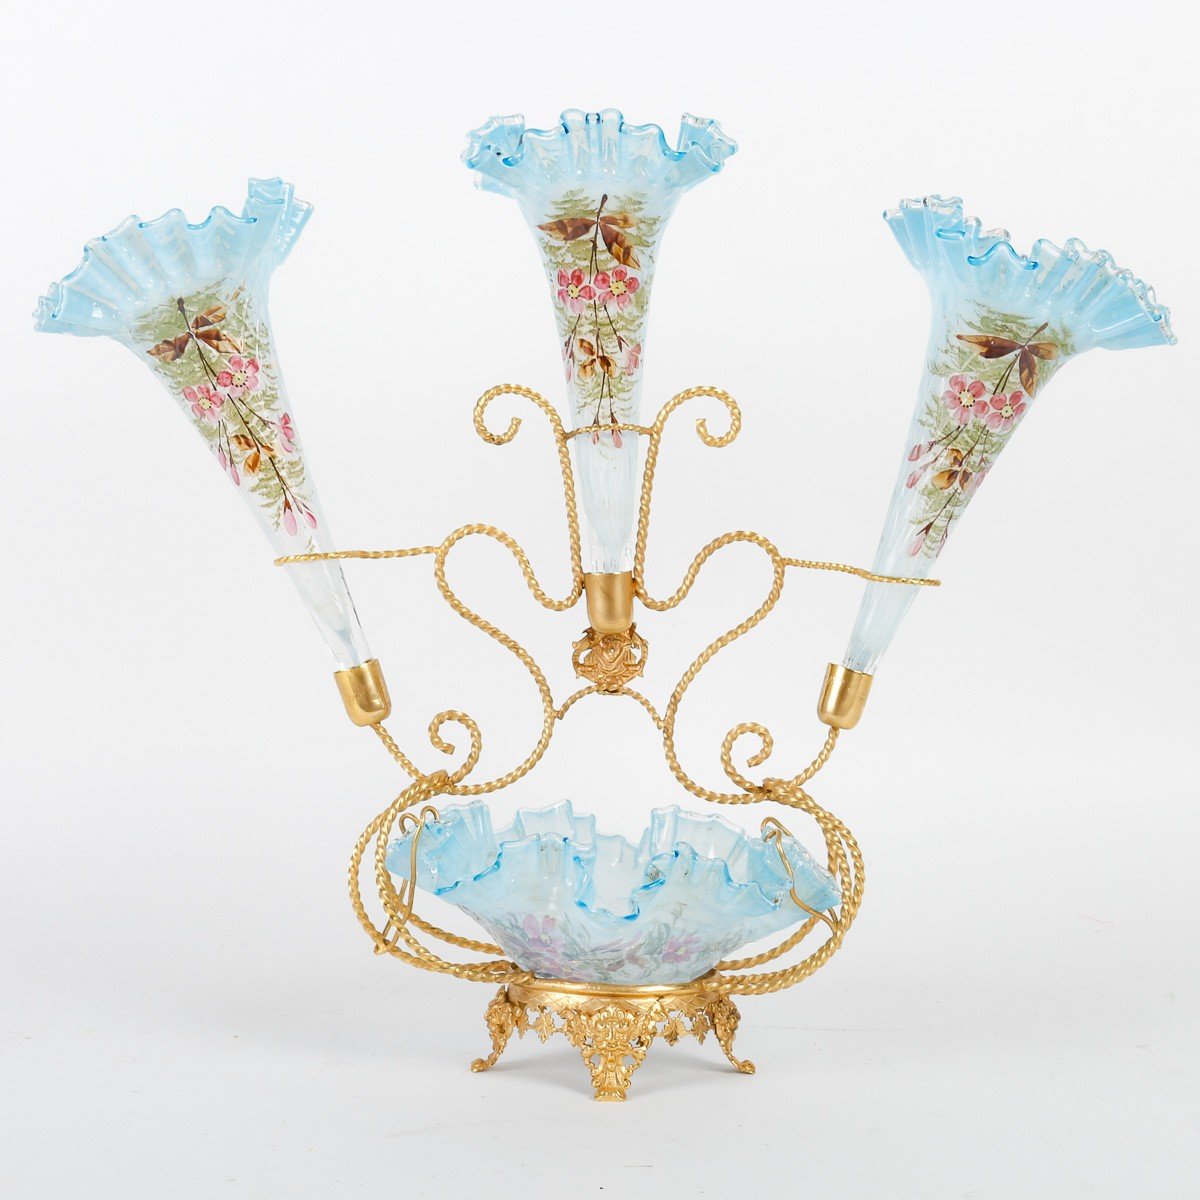 Blue Opaline Centerpiece Composed Of A Cup And Three Cornets, Enamelled